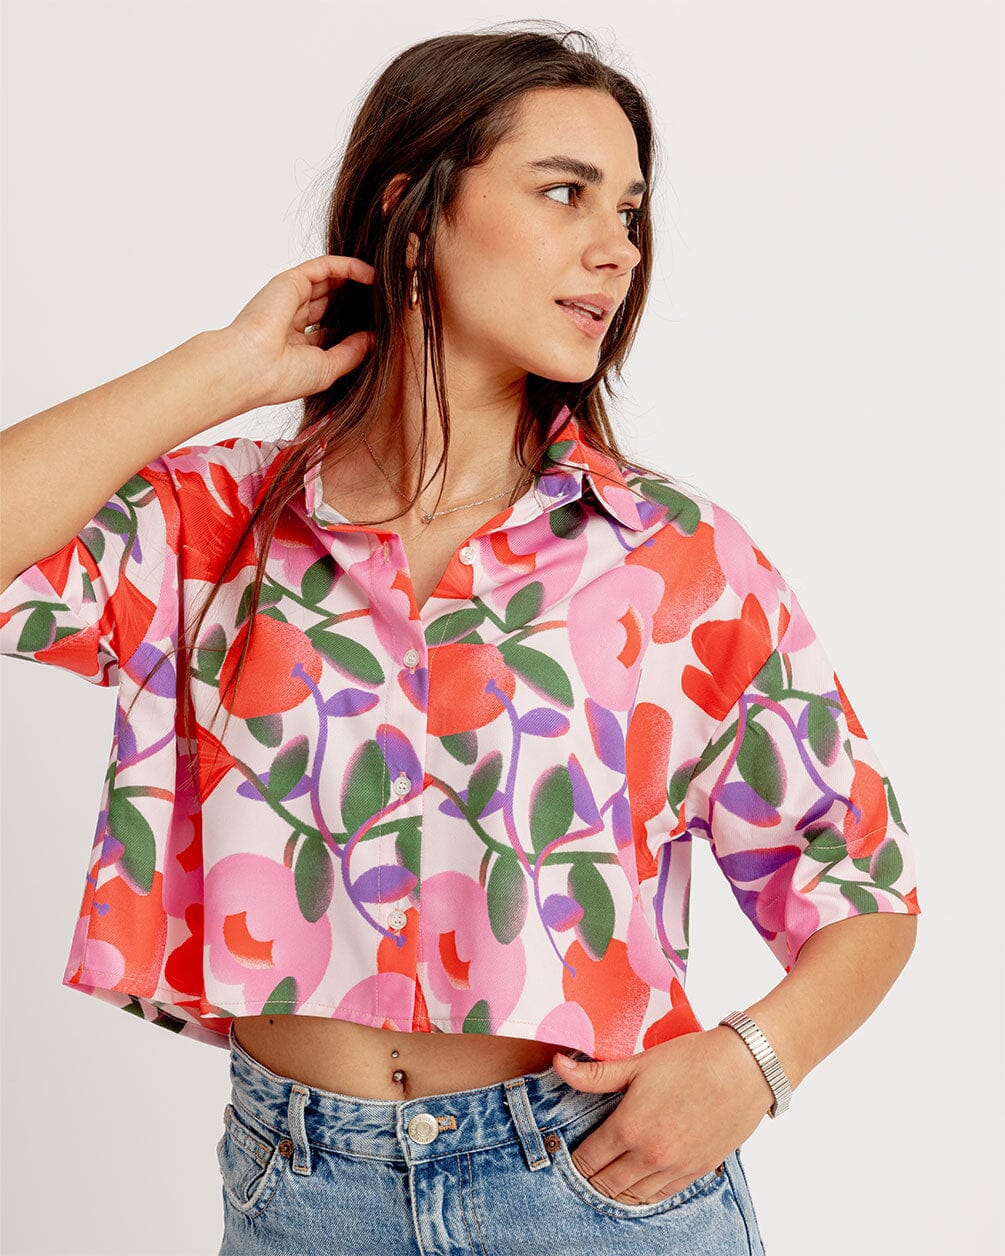 Clementine Cropped Shirt Cropped Shirt IN YOUR SHOE 